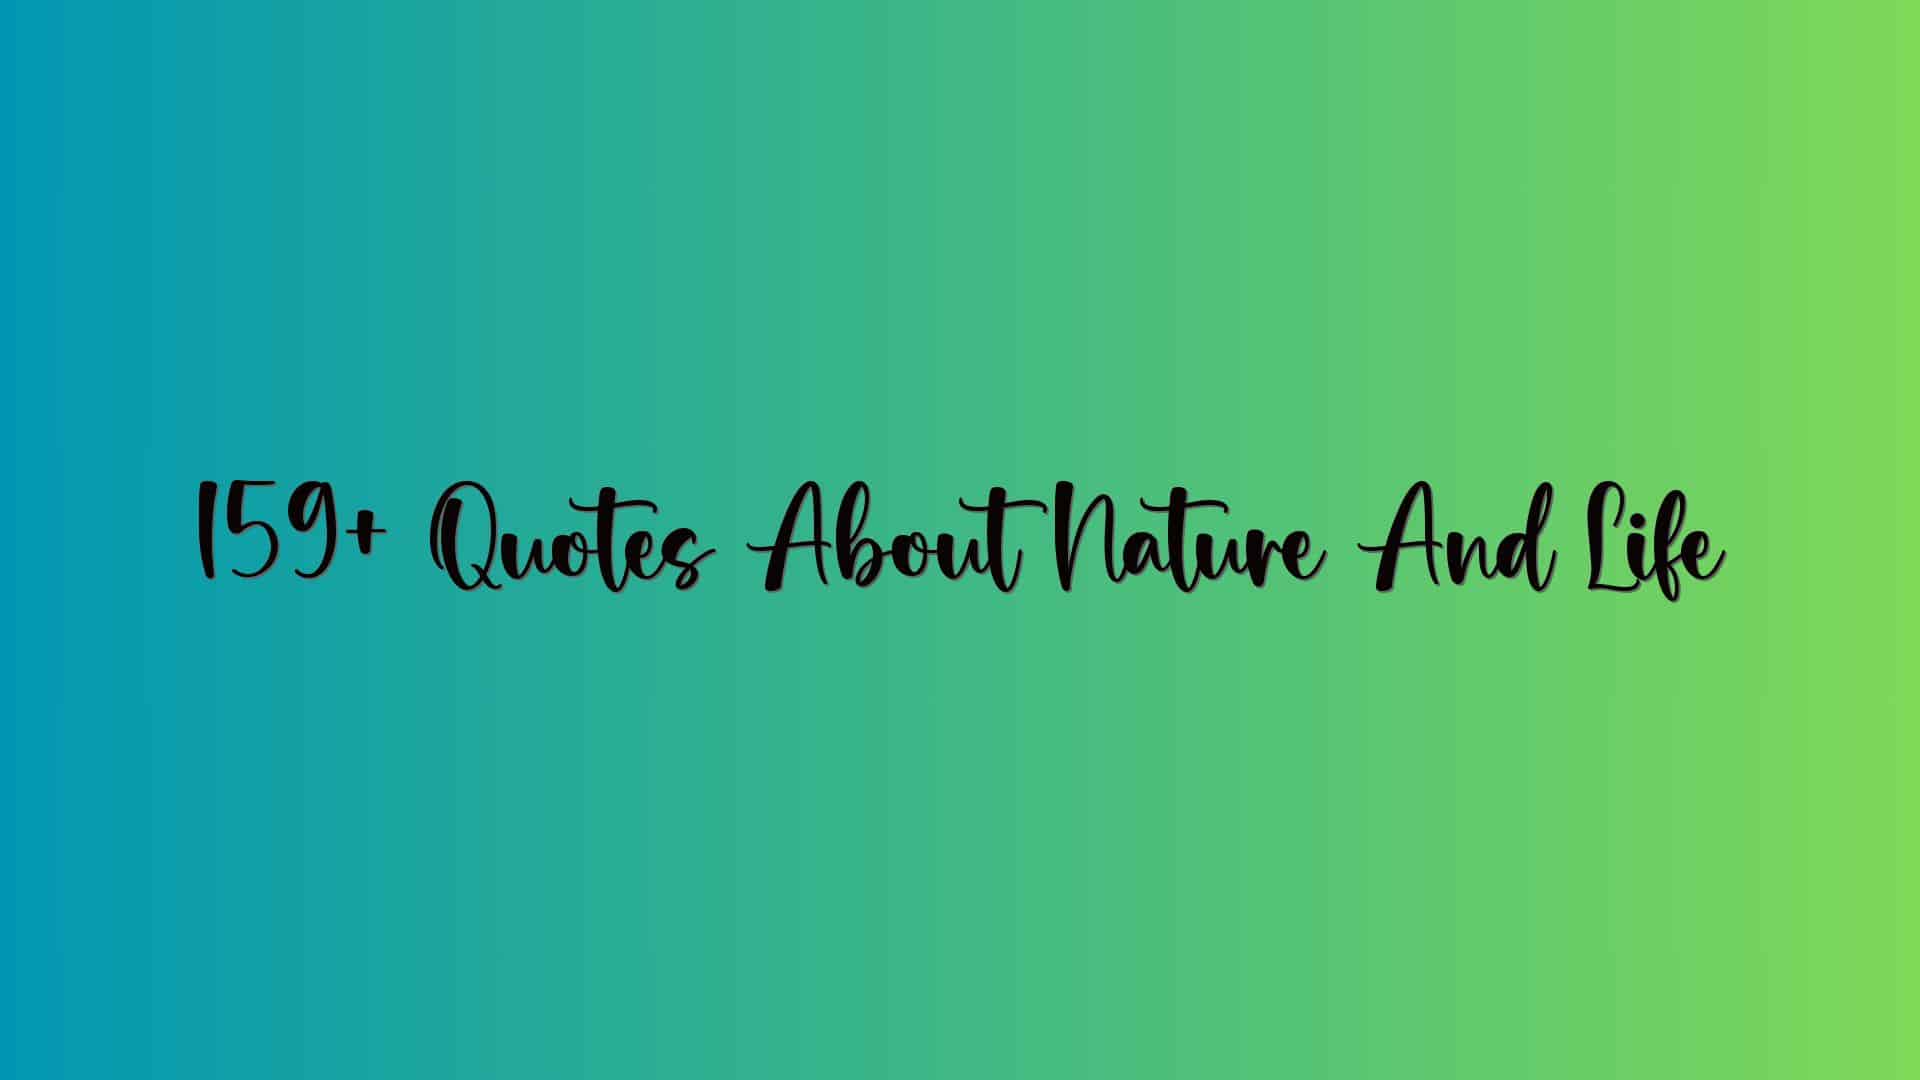 159+ Quotes About Nature And Life